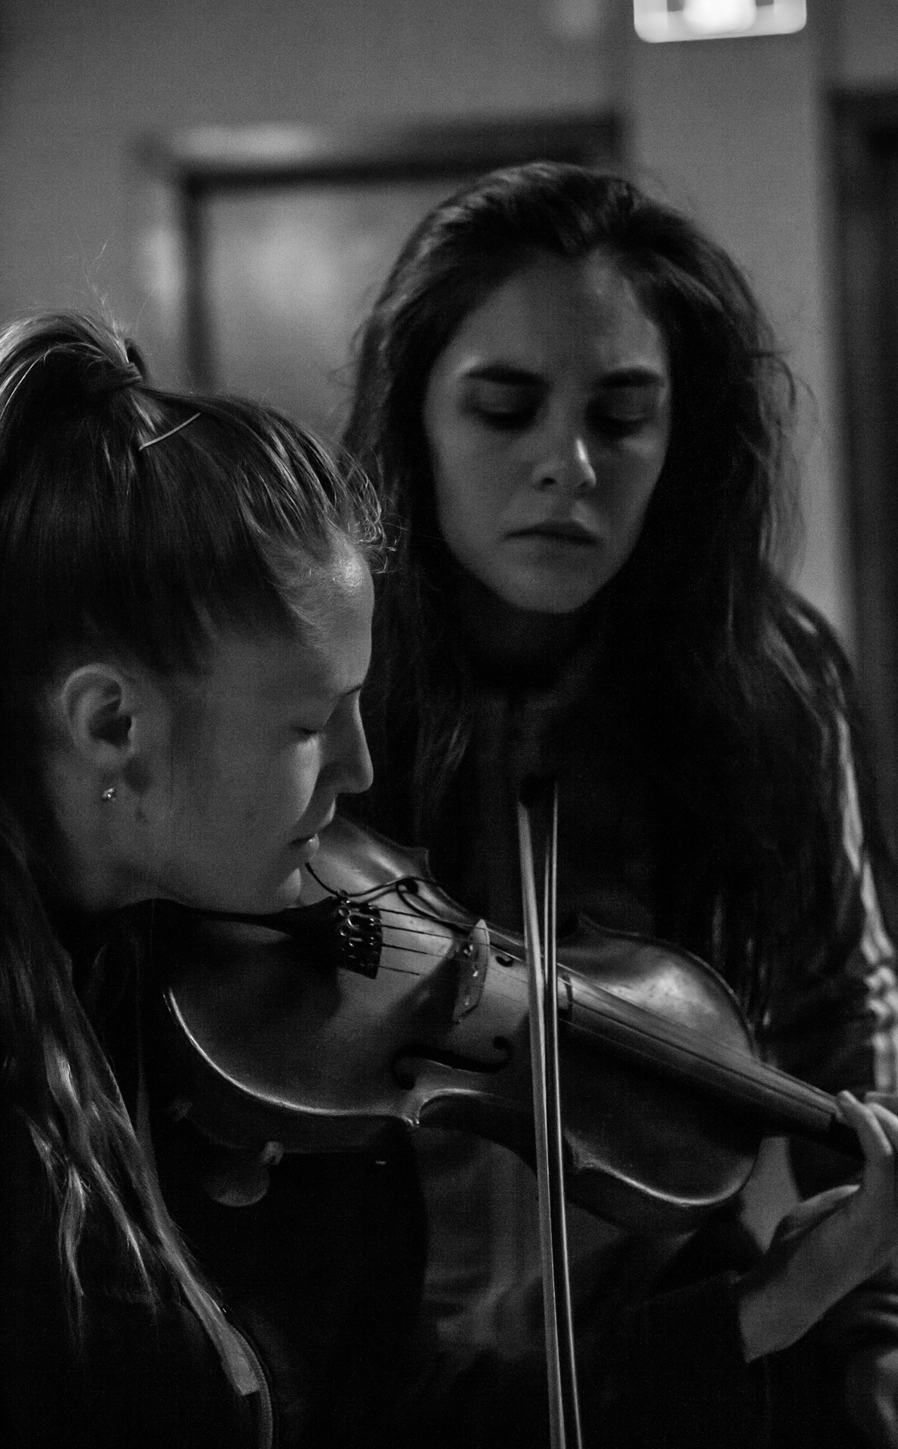 Dance artist Rebecca Margolick watches musician Hannah Epperson while she plays she plays the violin. Both have their eyes closed. This image is in greyscale.